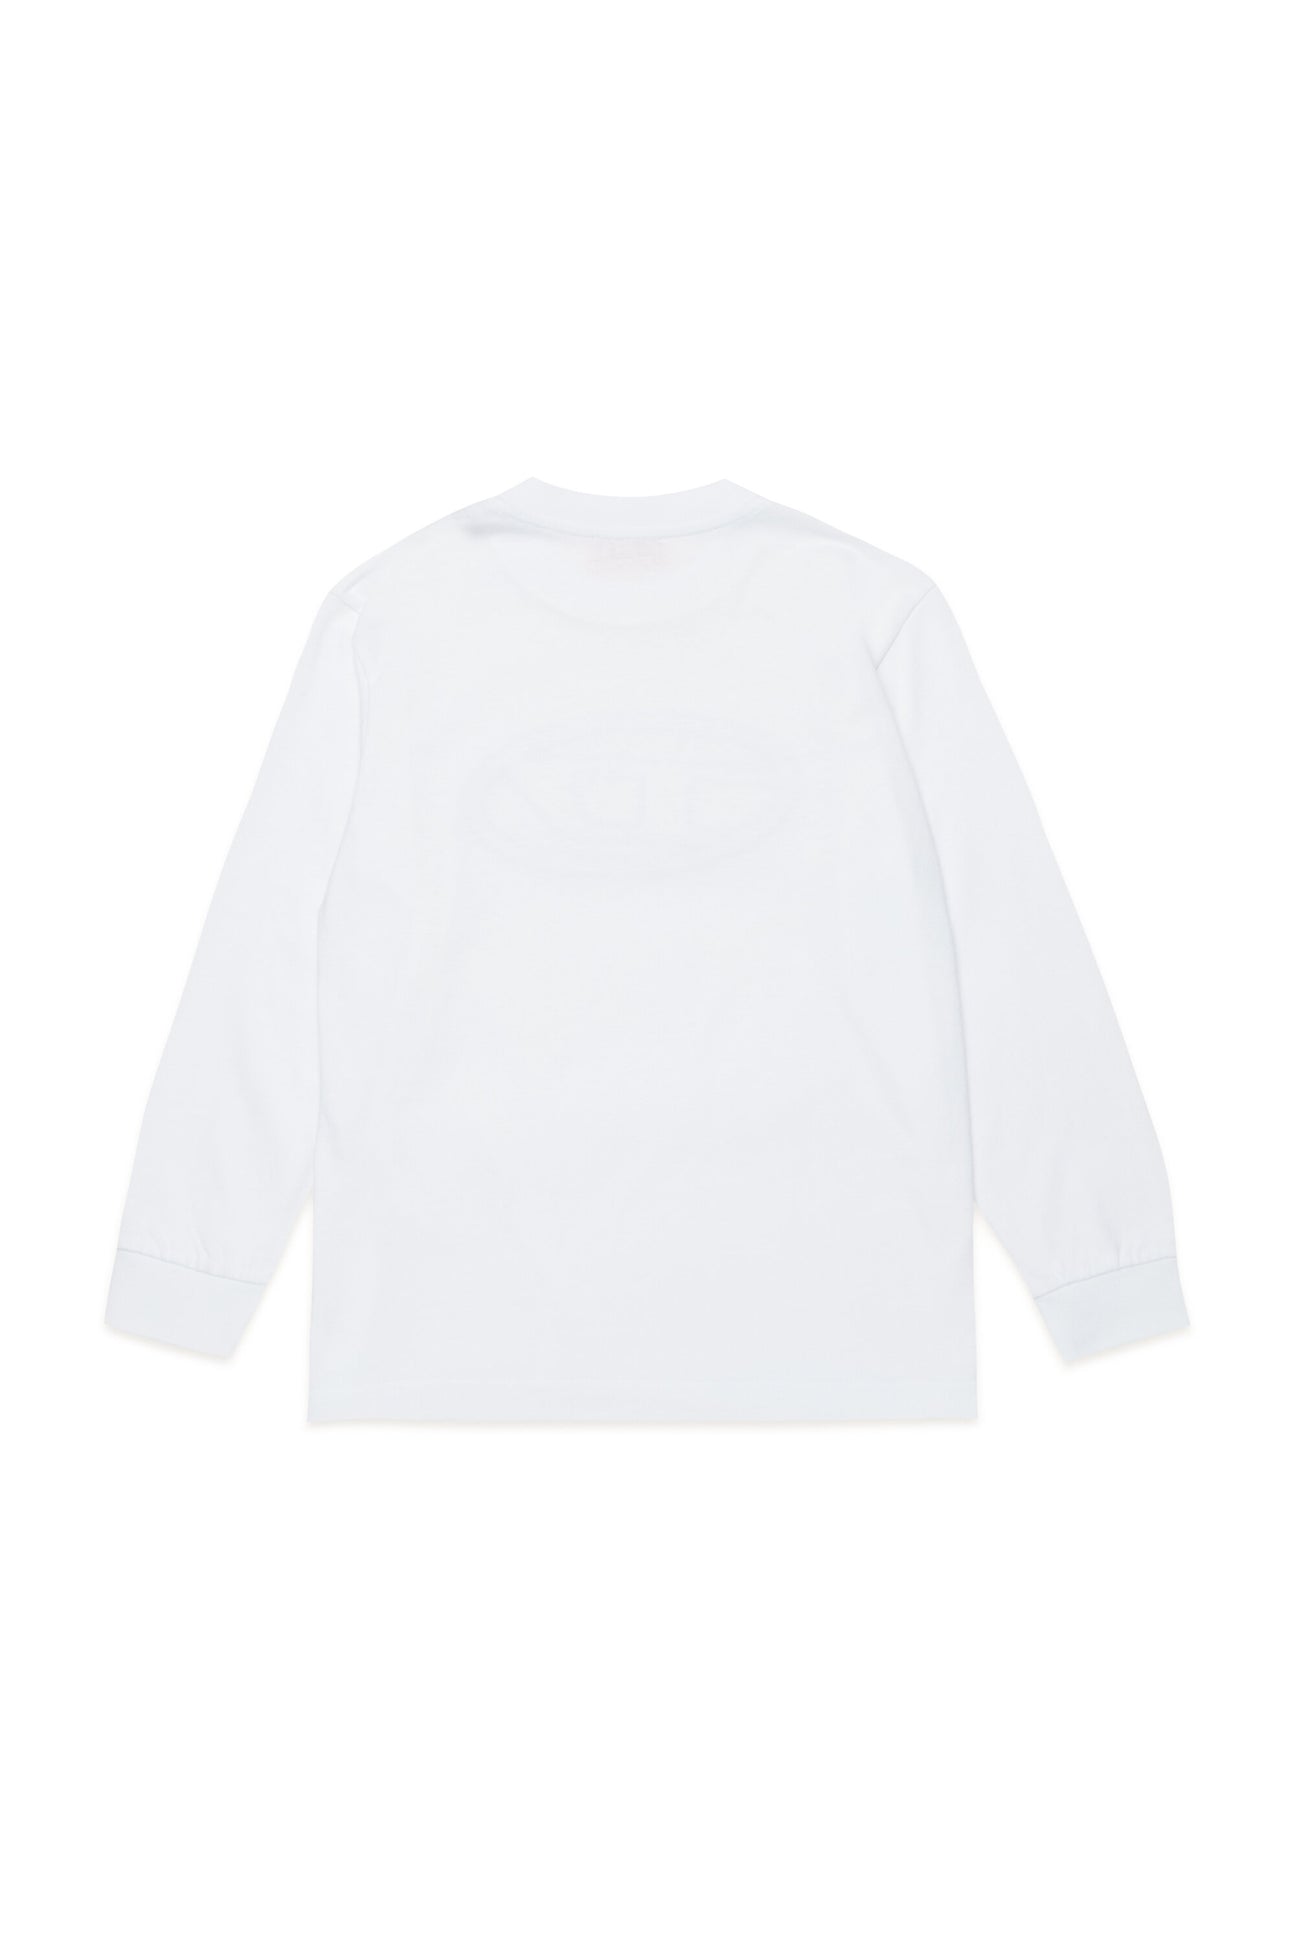 Oval D branded long-sleeved T-shirt Oval D branded long-sleeved T-shirt